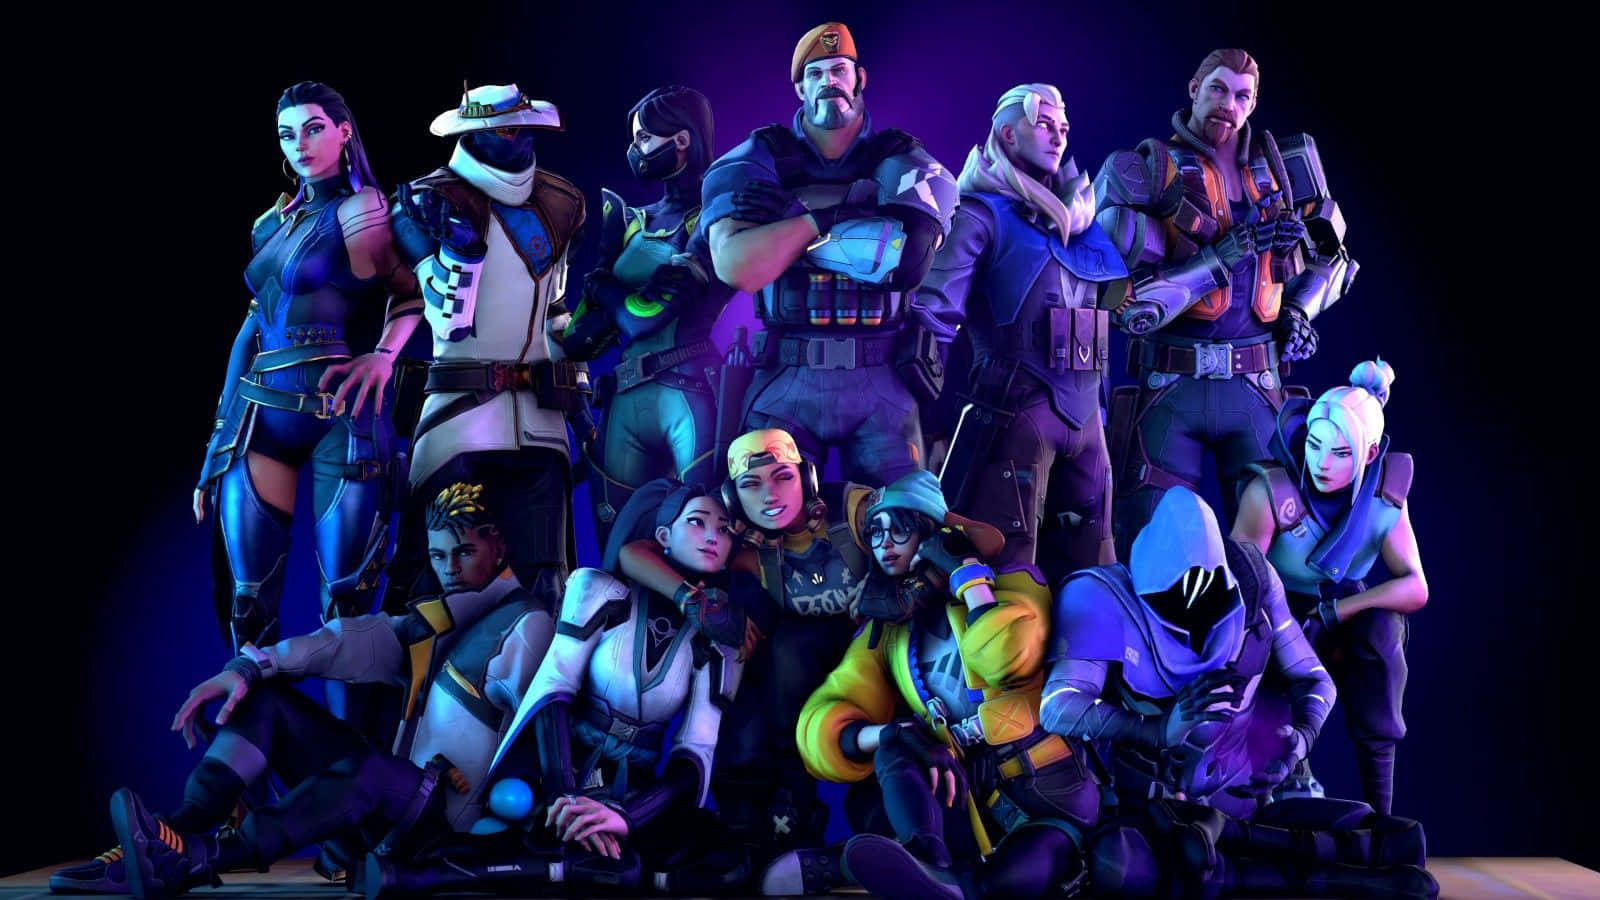 Fortnite - A Group Of Characters Posing